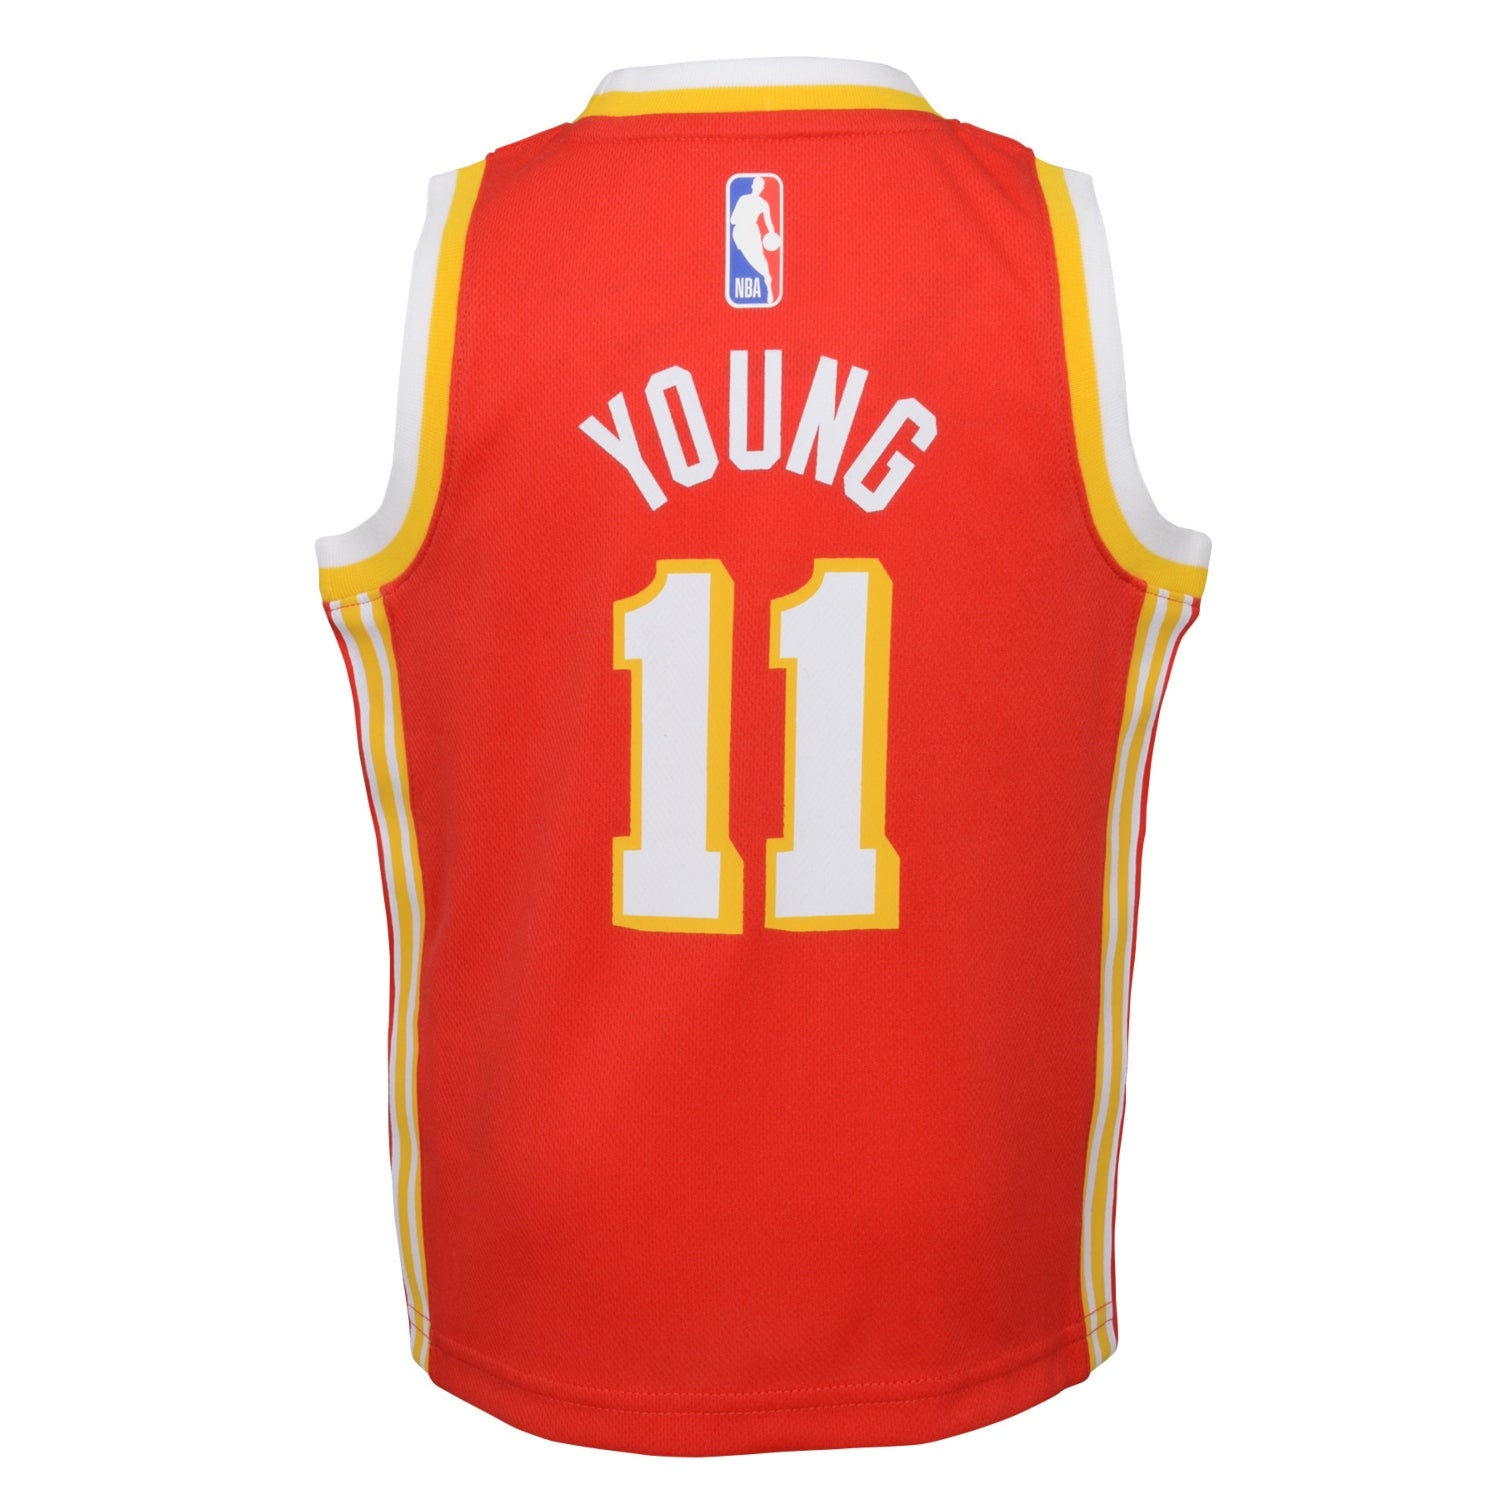 Young Nike Icon Edition Jersey - Hawks